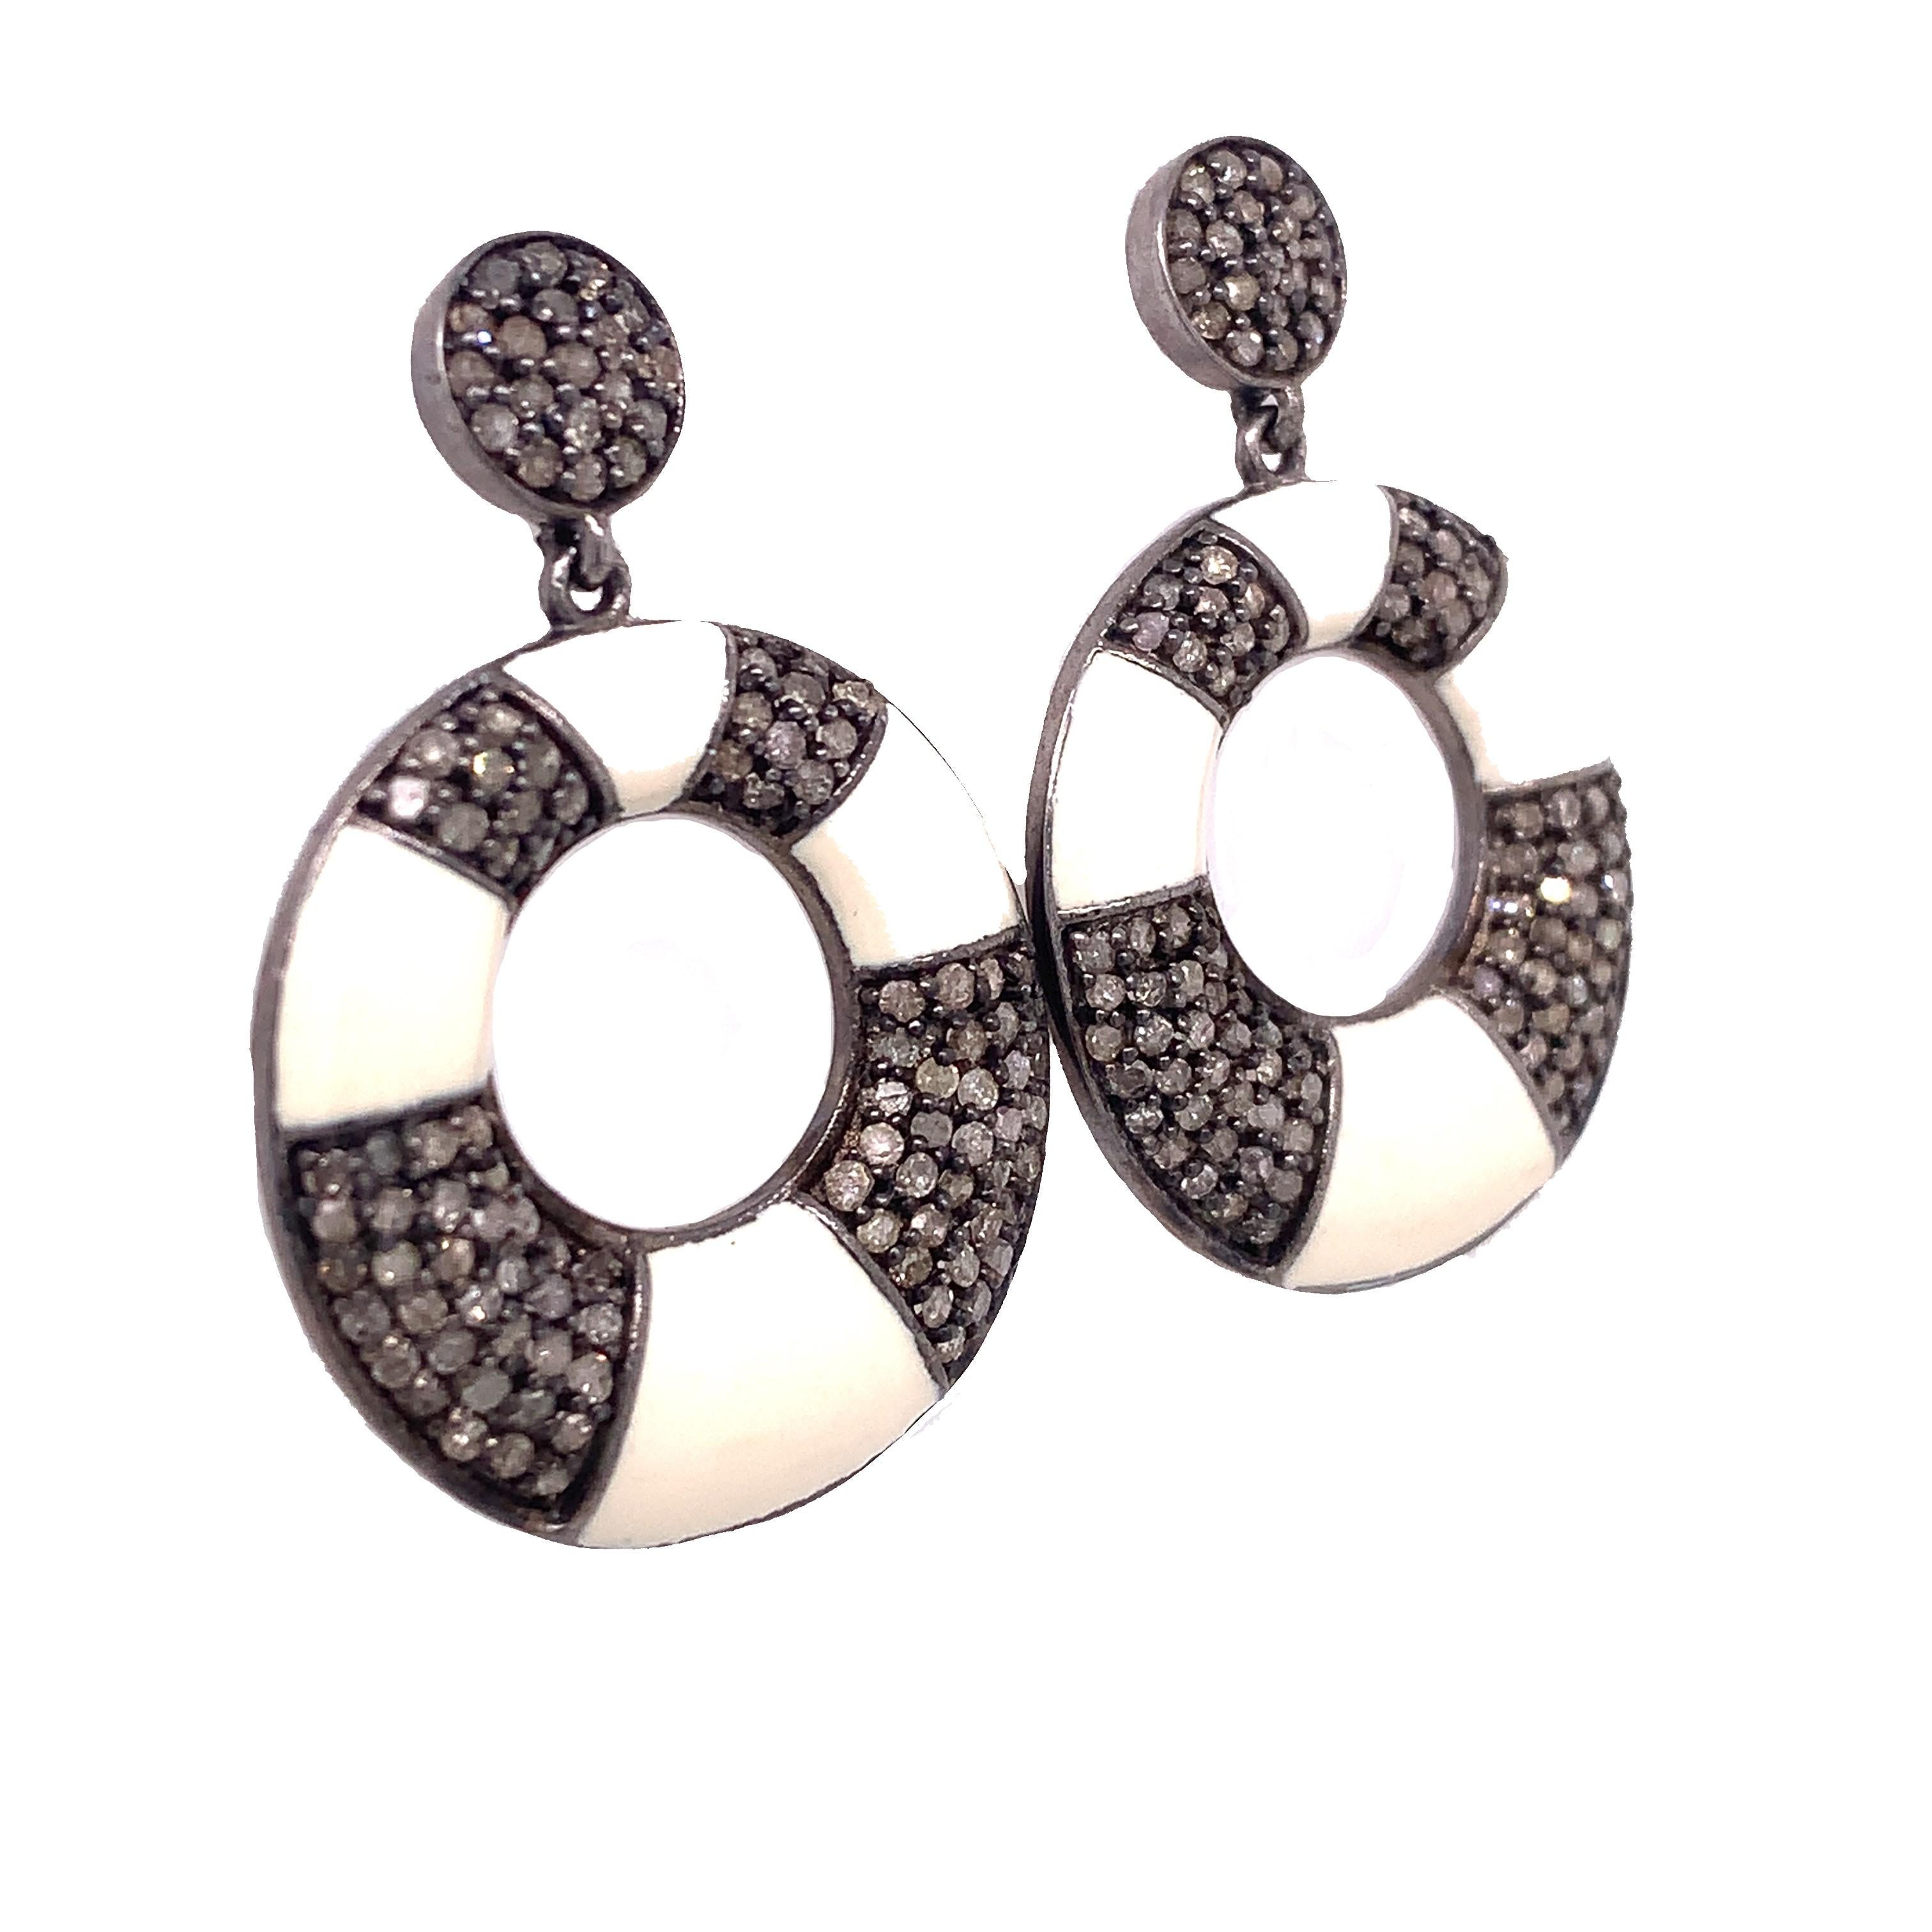 Life in color Collection

White Enamel with icy Diamonds set in blackened Sterling Silver to create one of a kind frontal dangle earrings.